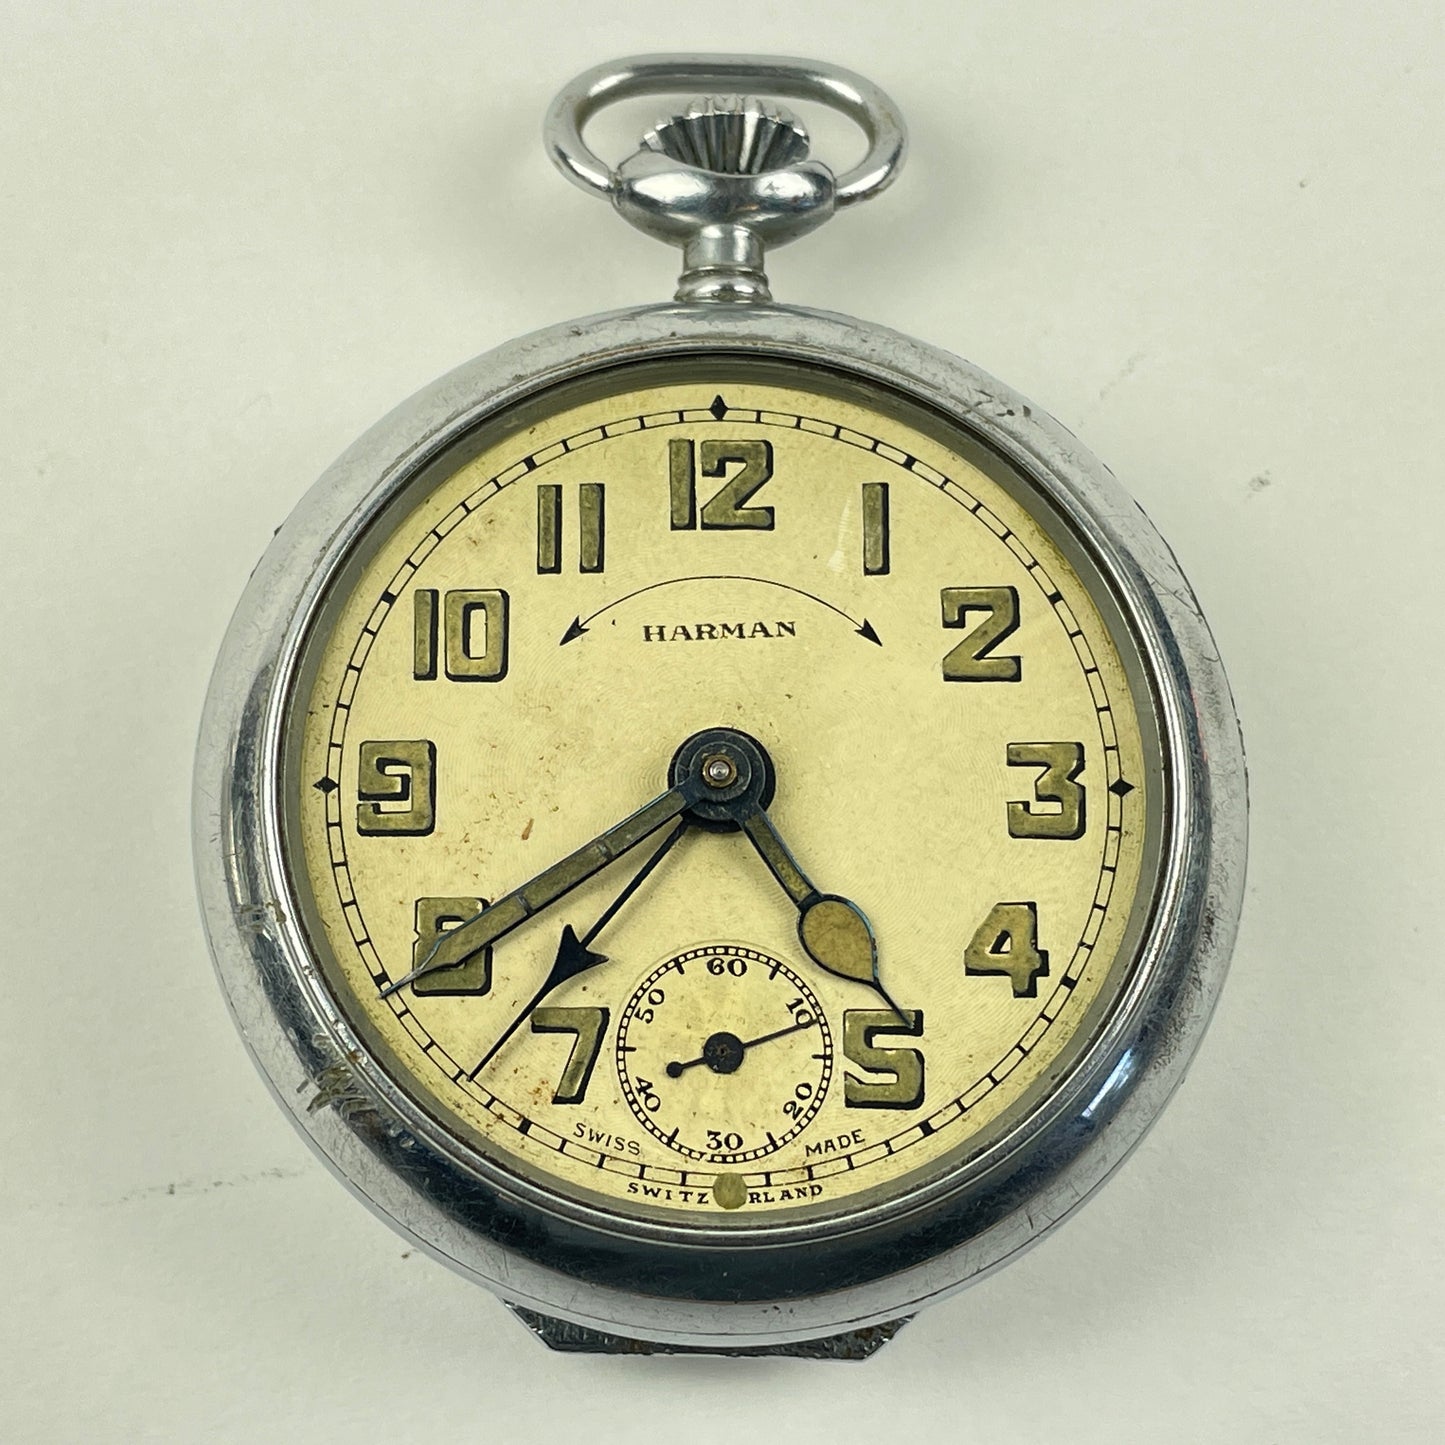 Lot 96- Swiss Pair of Travel Alarm Pocket Watches